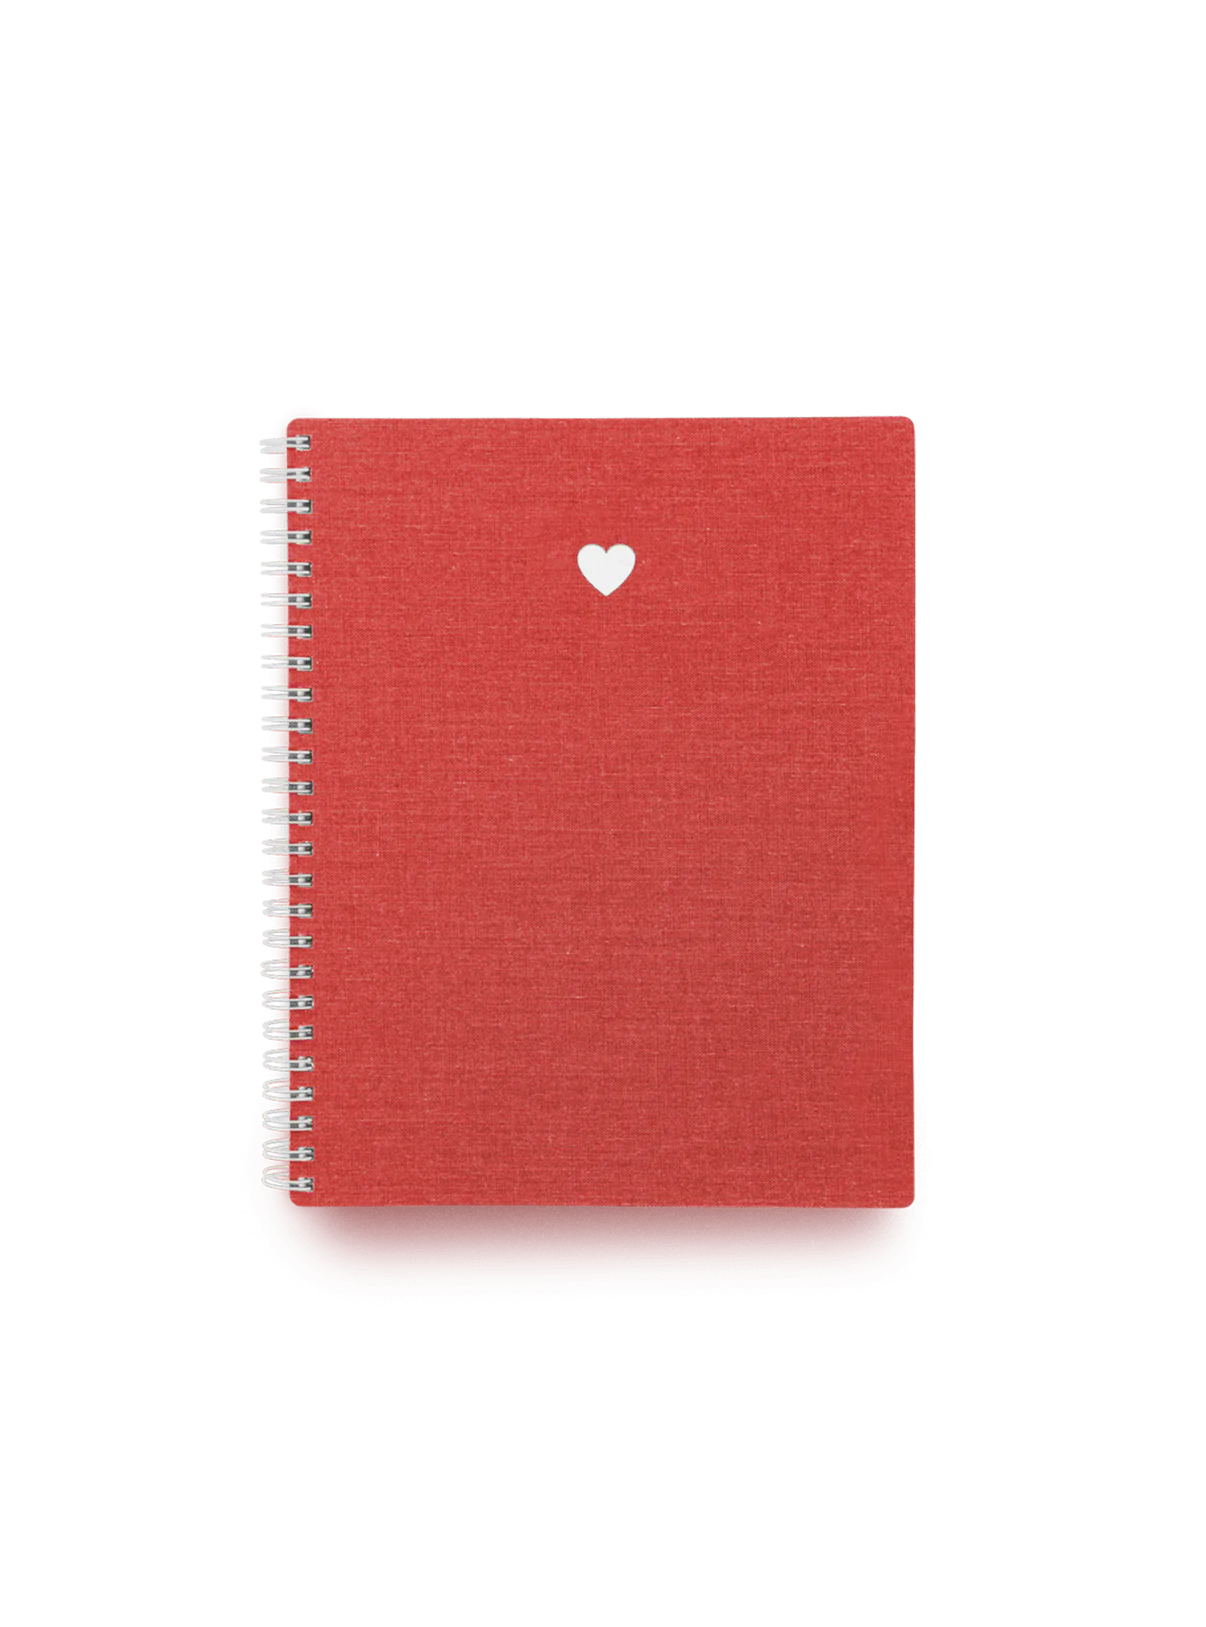 Appointed Coiled Notebook Lined - Red Heart